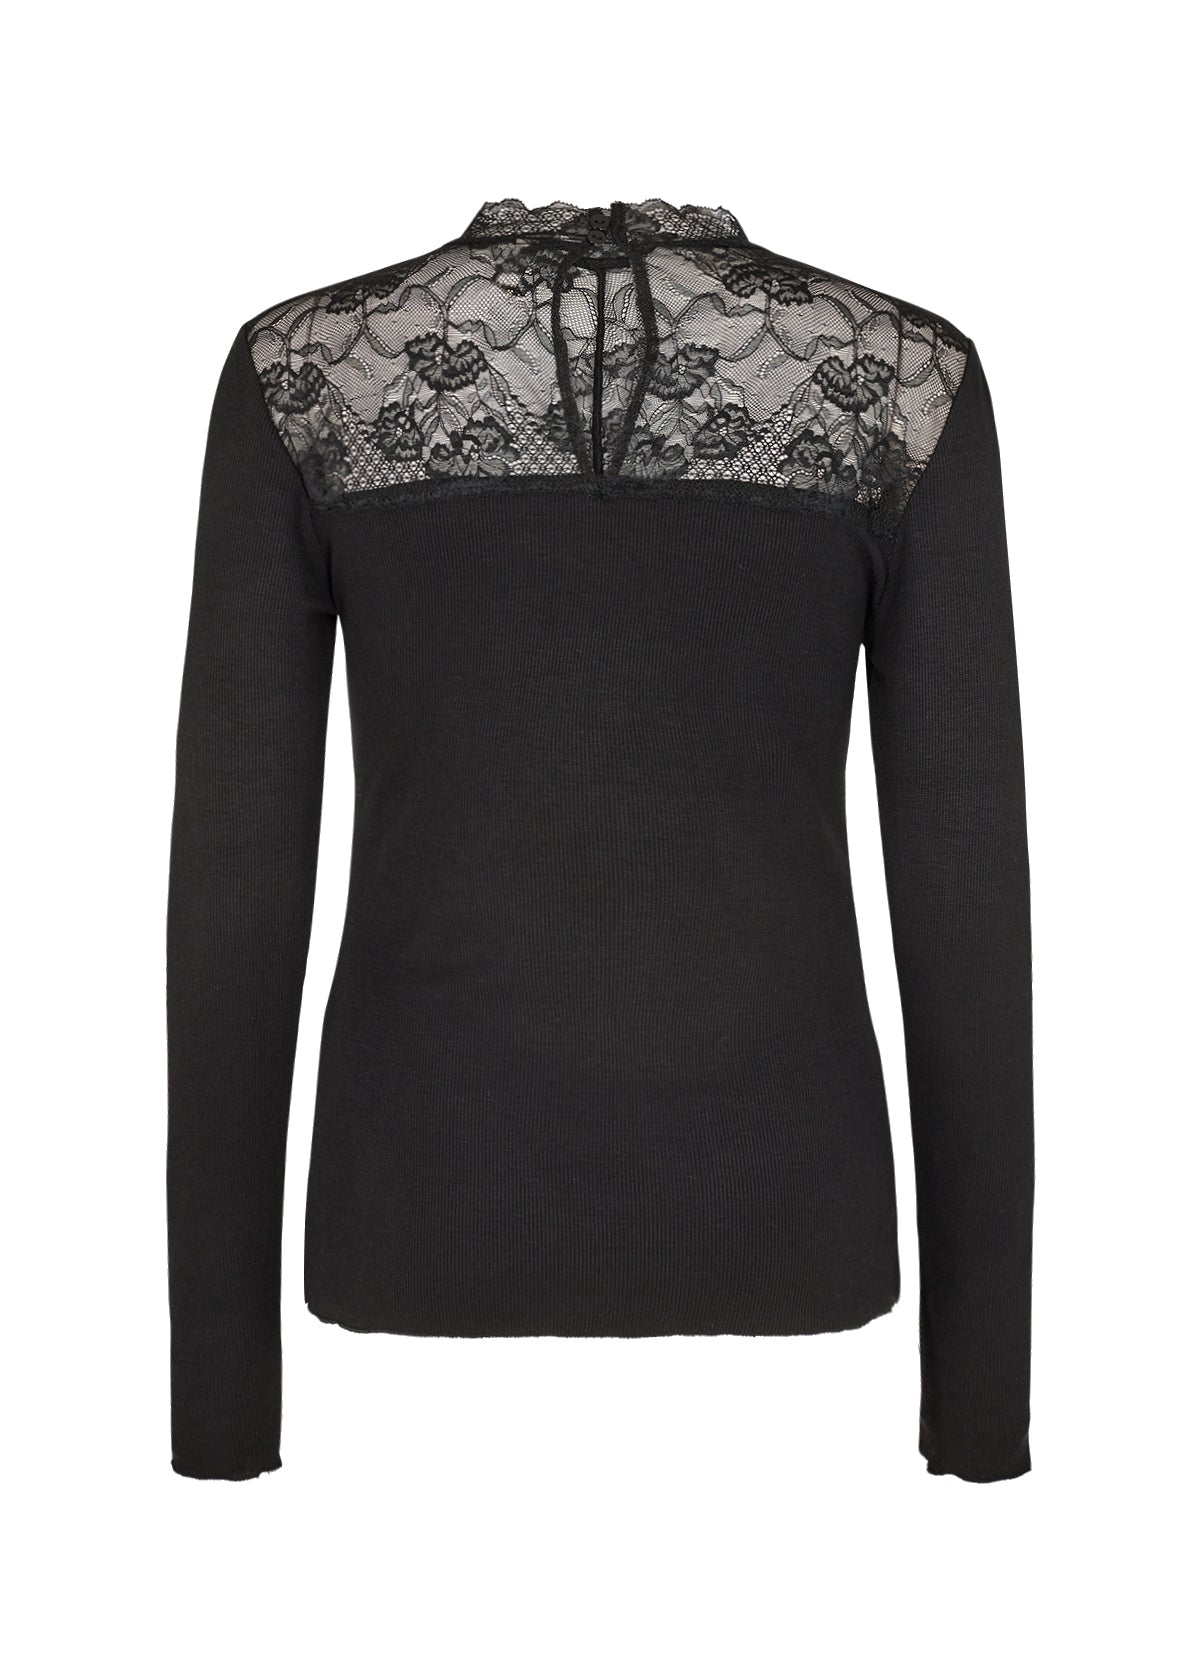 Soya Concept long sleeve lace top